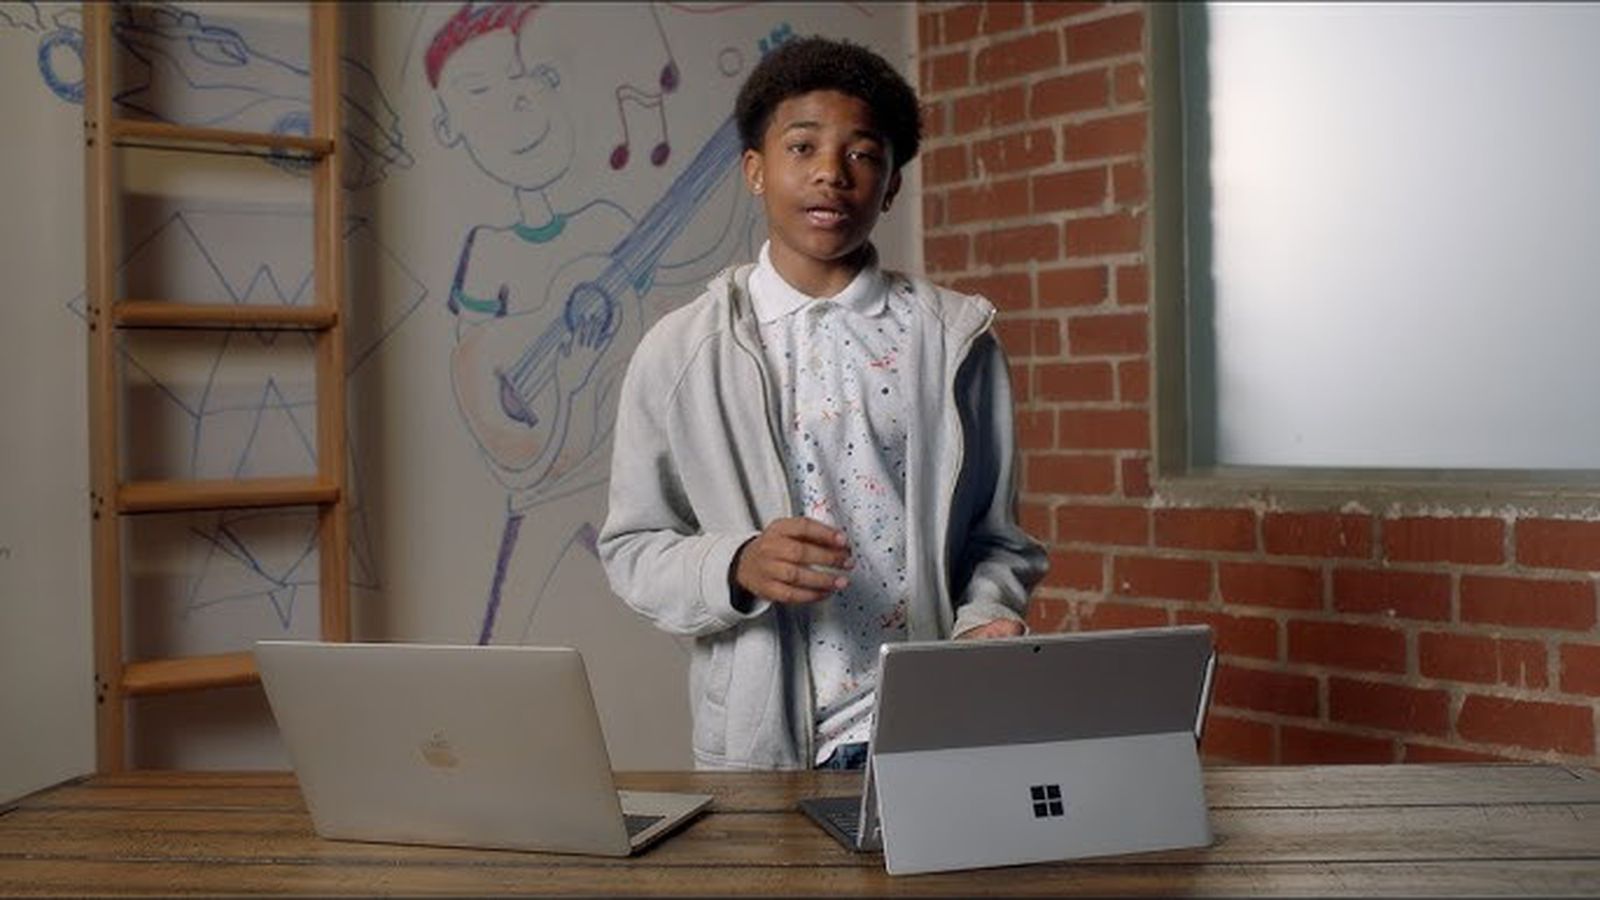 Microsoft announces Surface Pro 7 as “Better Choice” over MacBook Pro in new ad